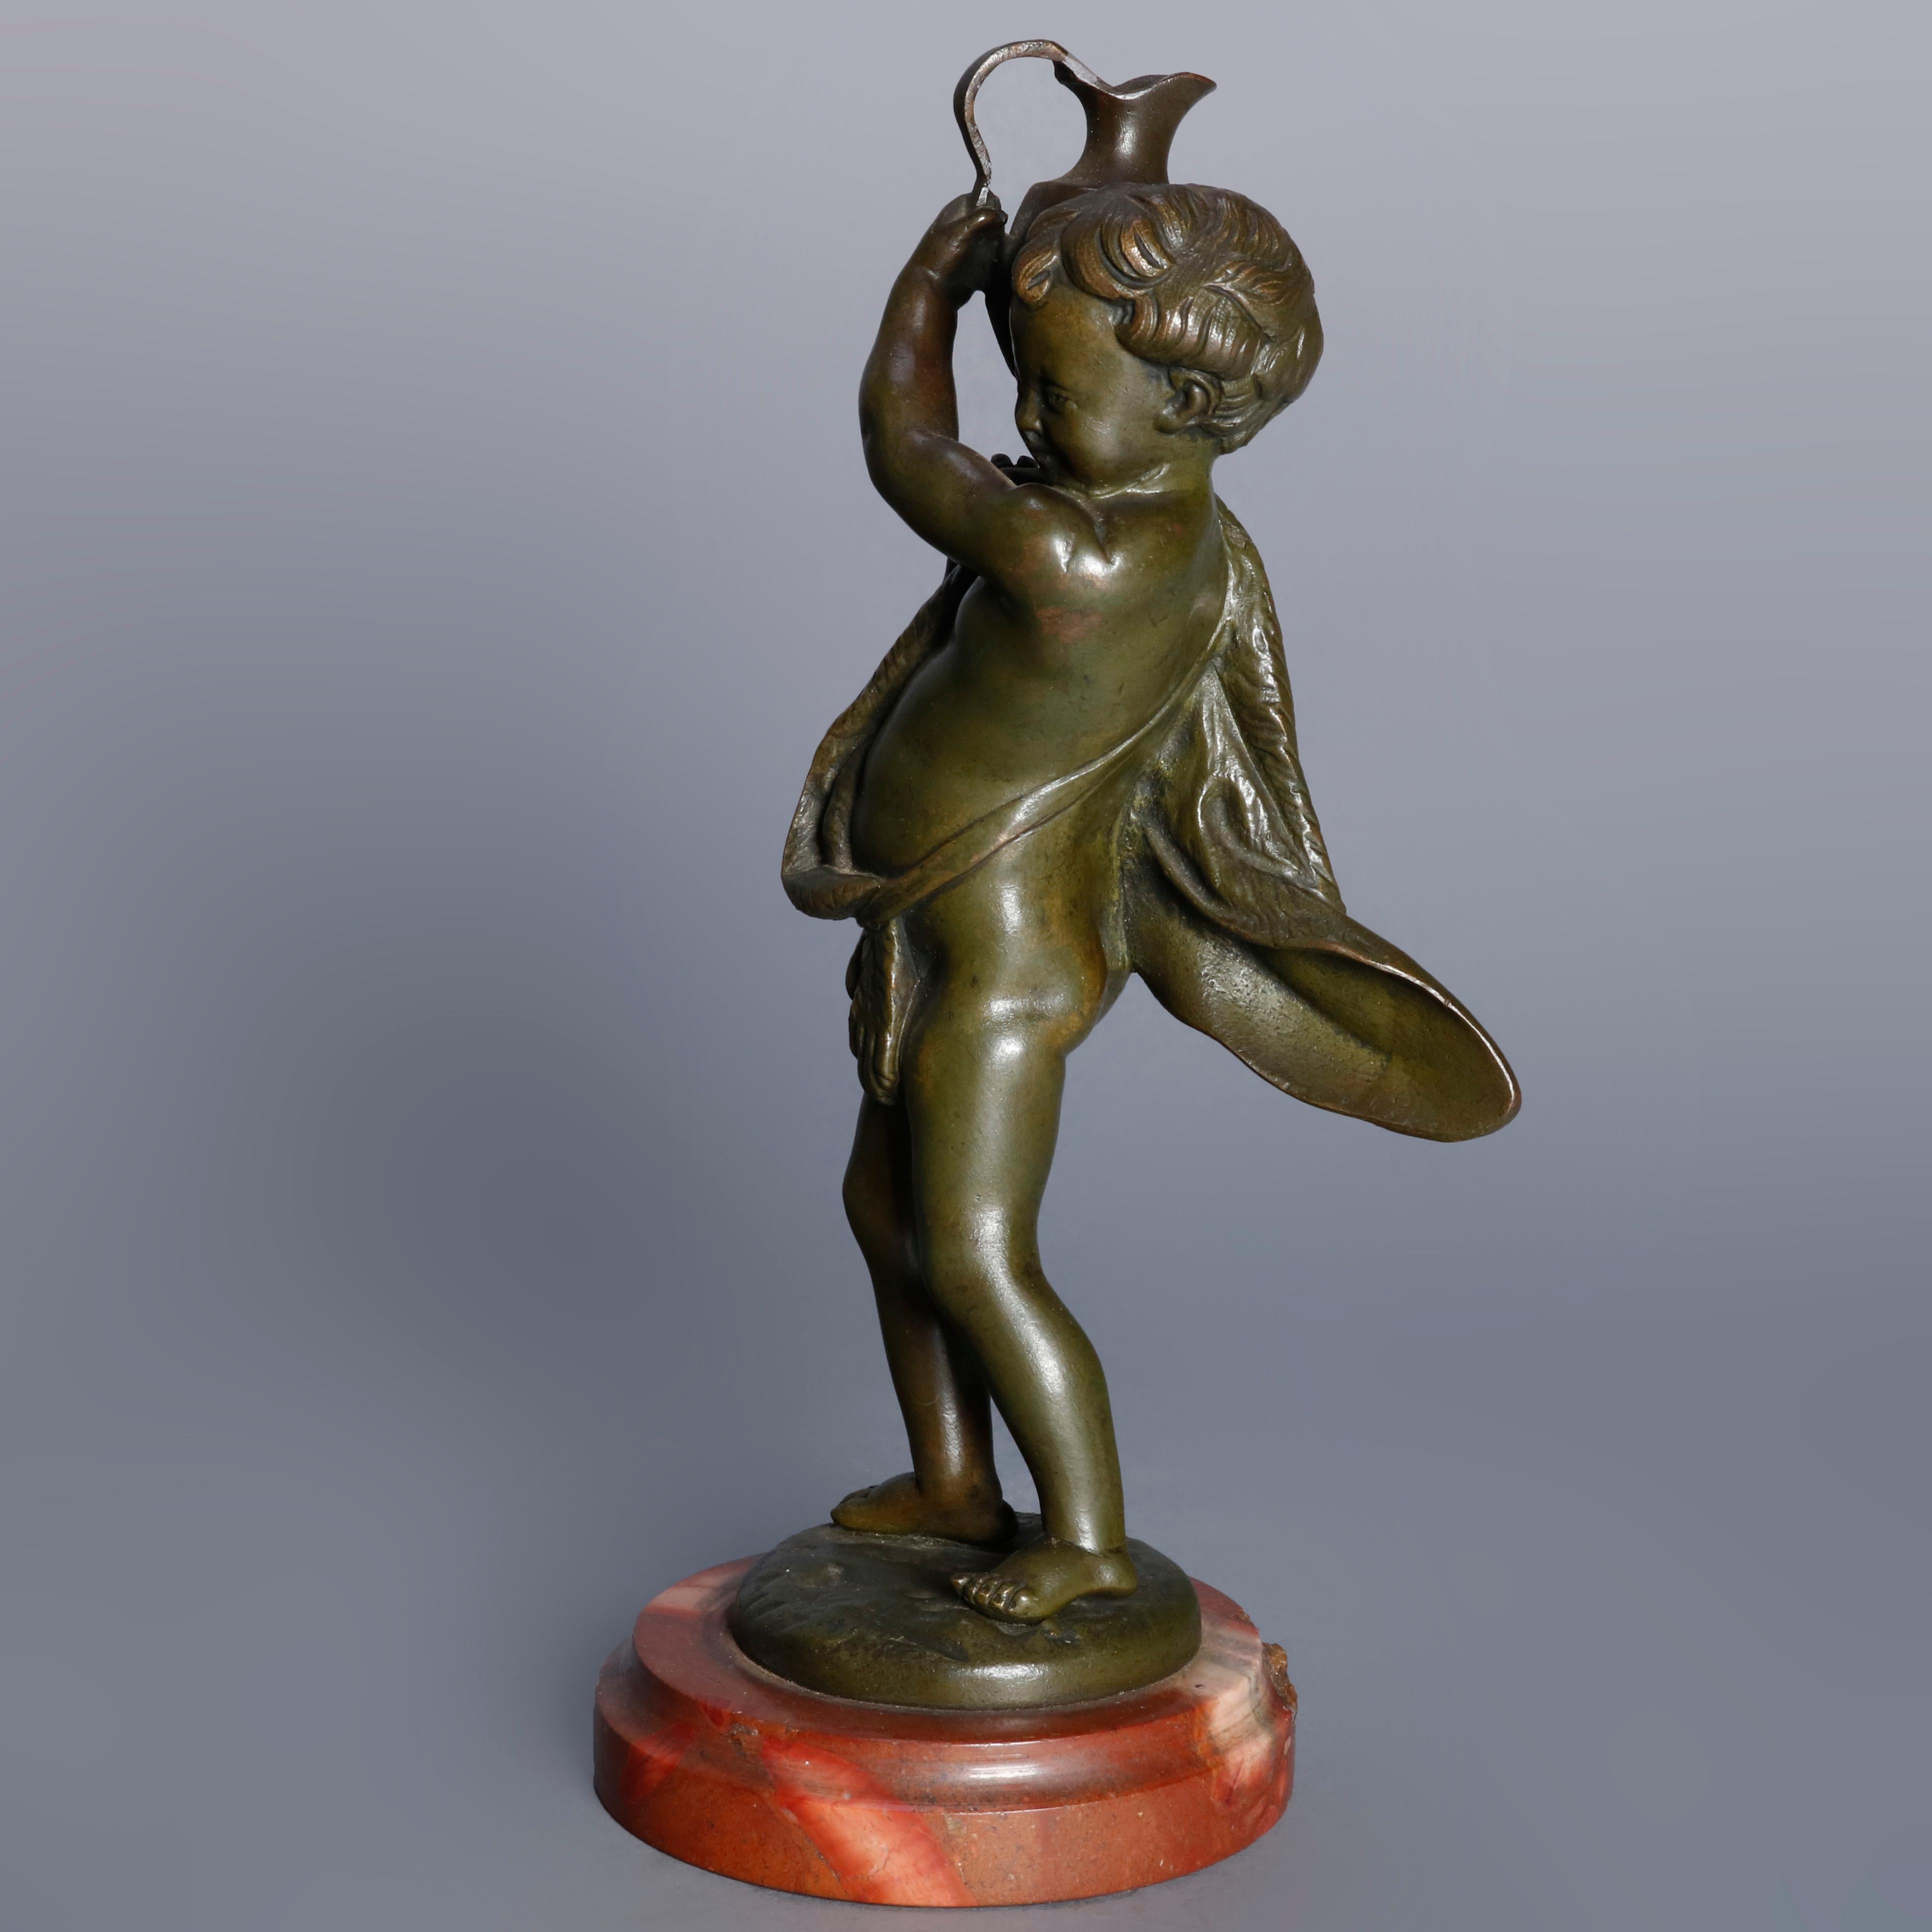 Antique French figural bronze sculpture depicts cherub with water vessel, mounted on marble base, circa 1890. 

Measures: 8